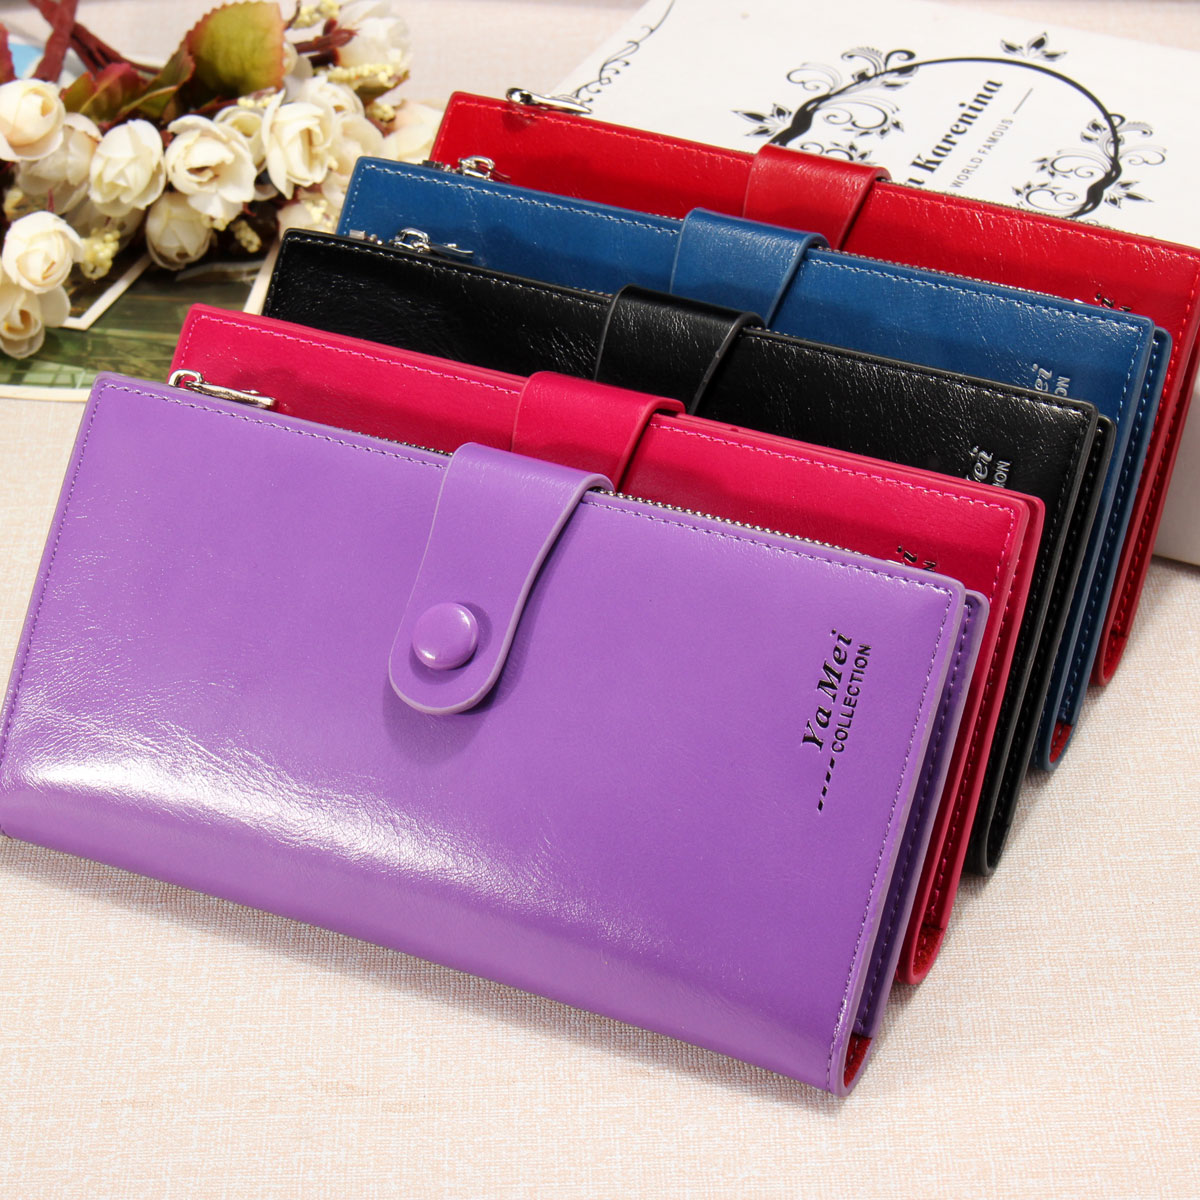 Fashion-Flip-Zippers-Large-Capacity-with-Multi-Card-Slots-Phone-ID-Card-Storage-Bag-PU-Leather-Women-1041669-12